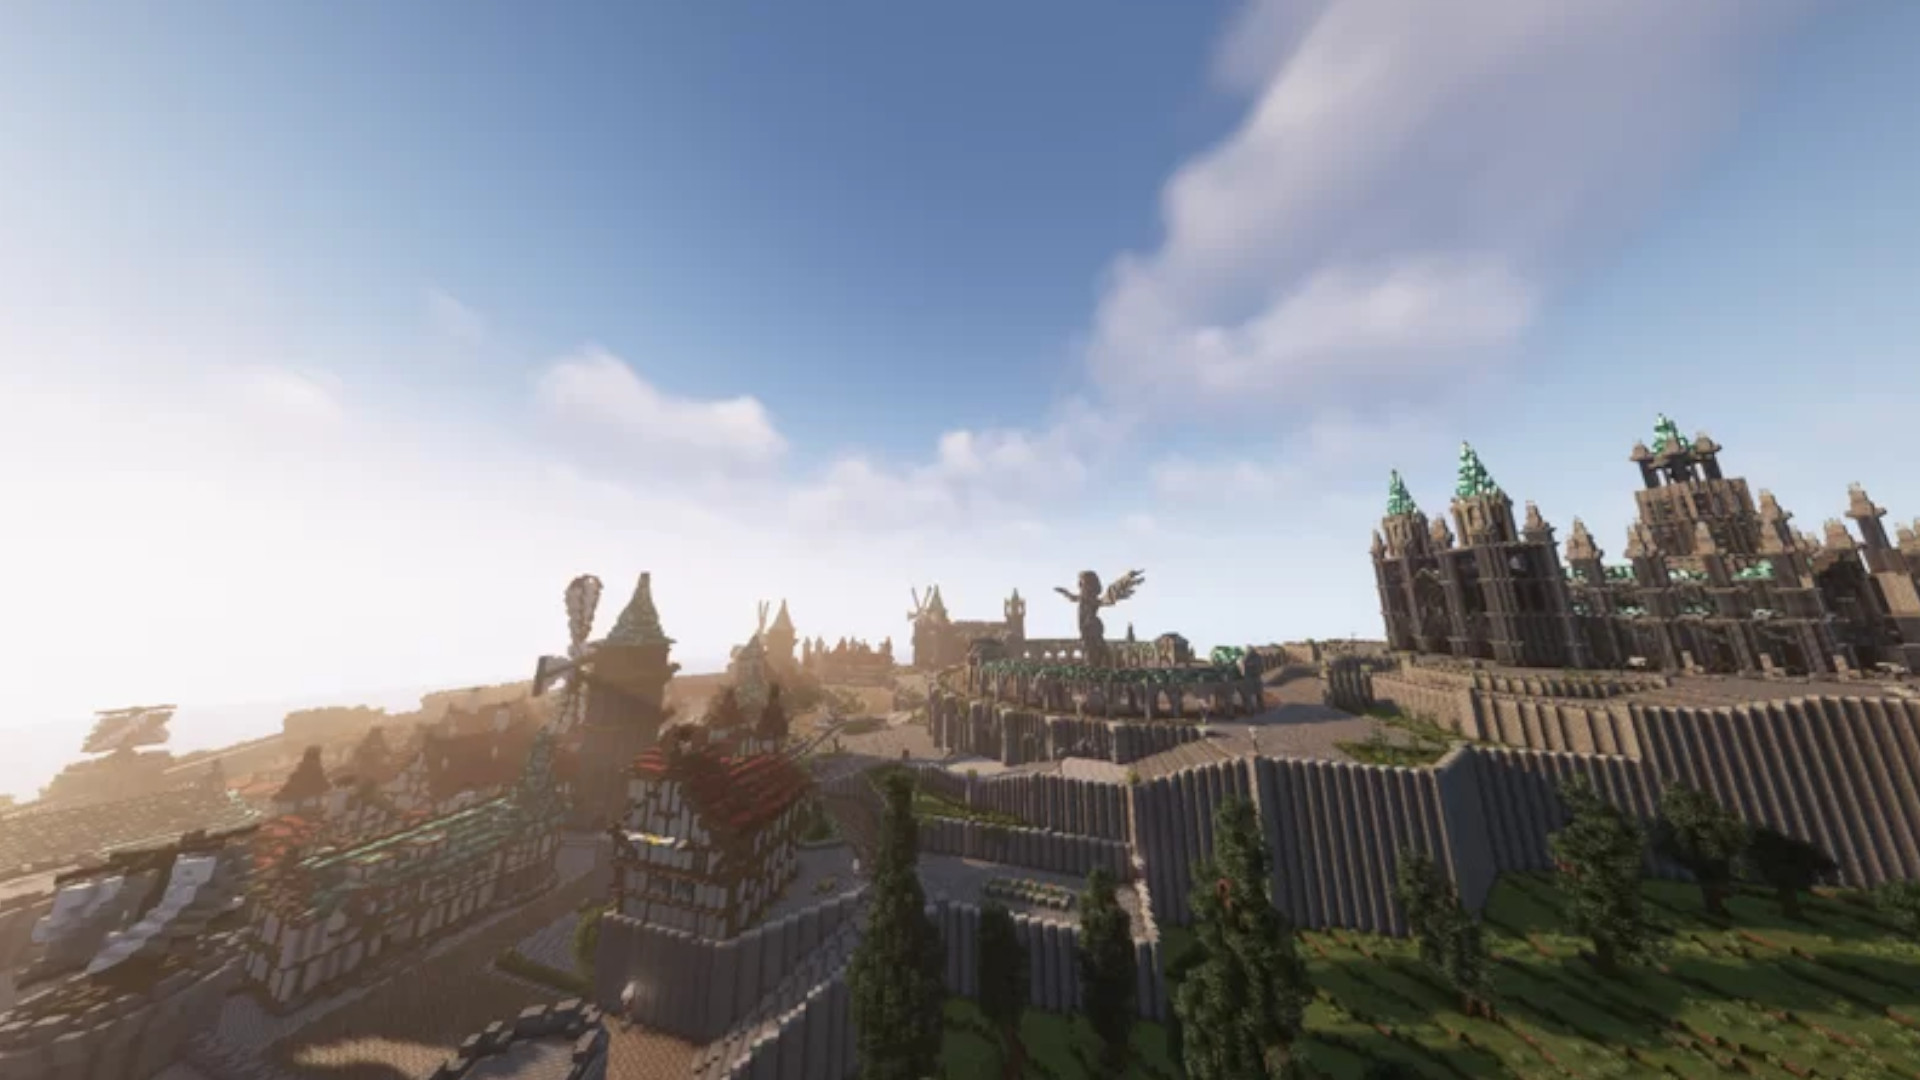 Minecraft players spend 400 hours building Genshin Impact's Mondstadt at 1:1 scale